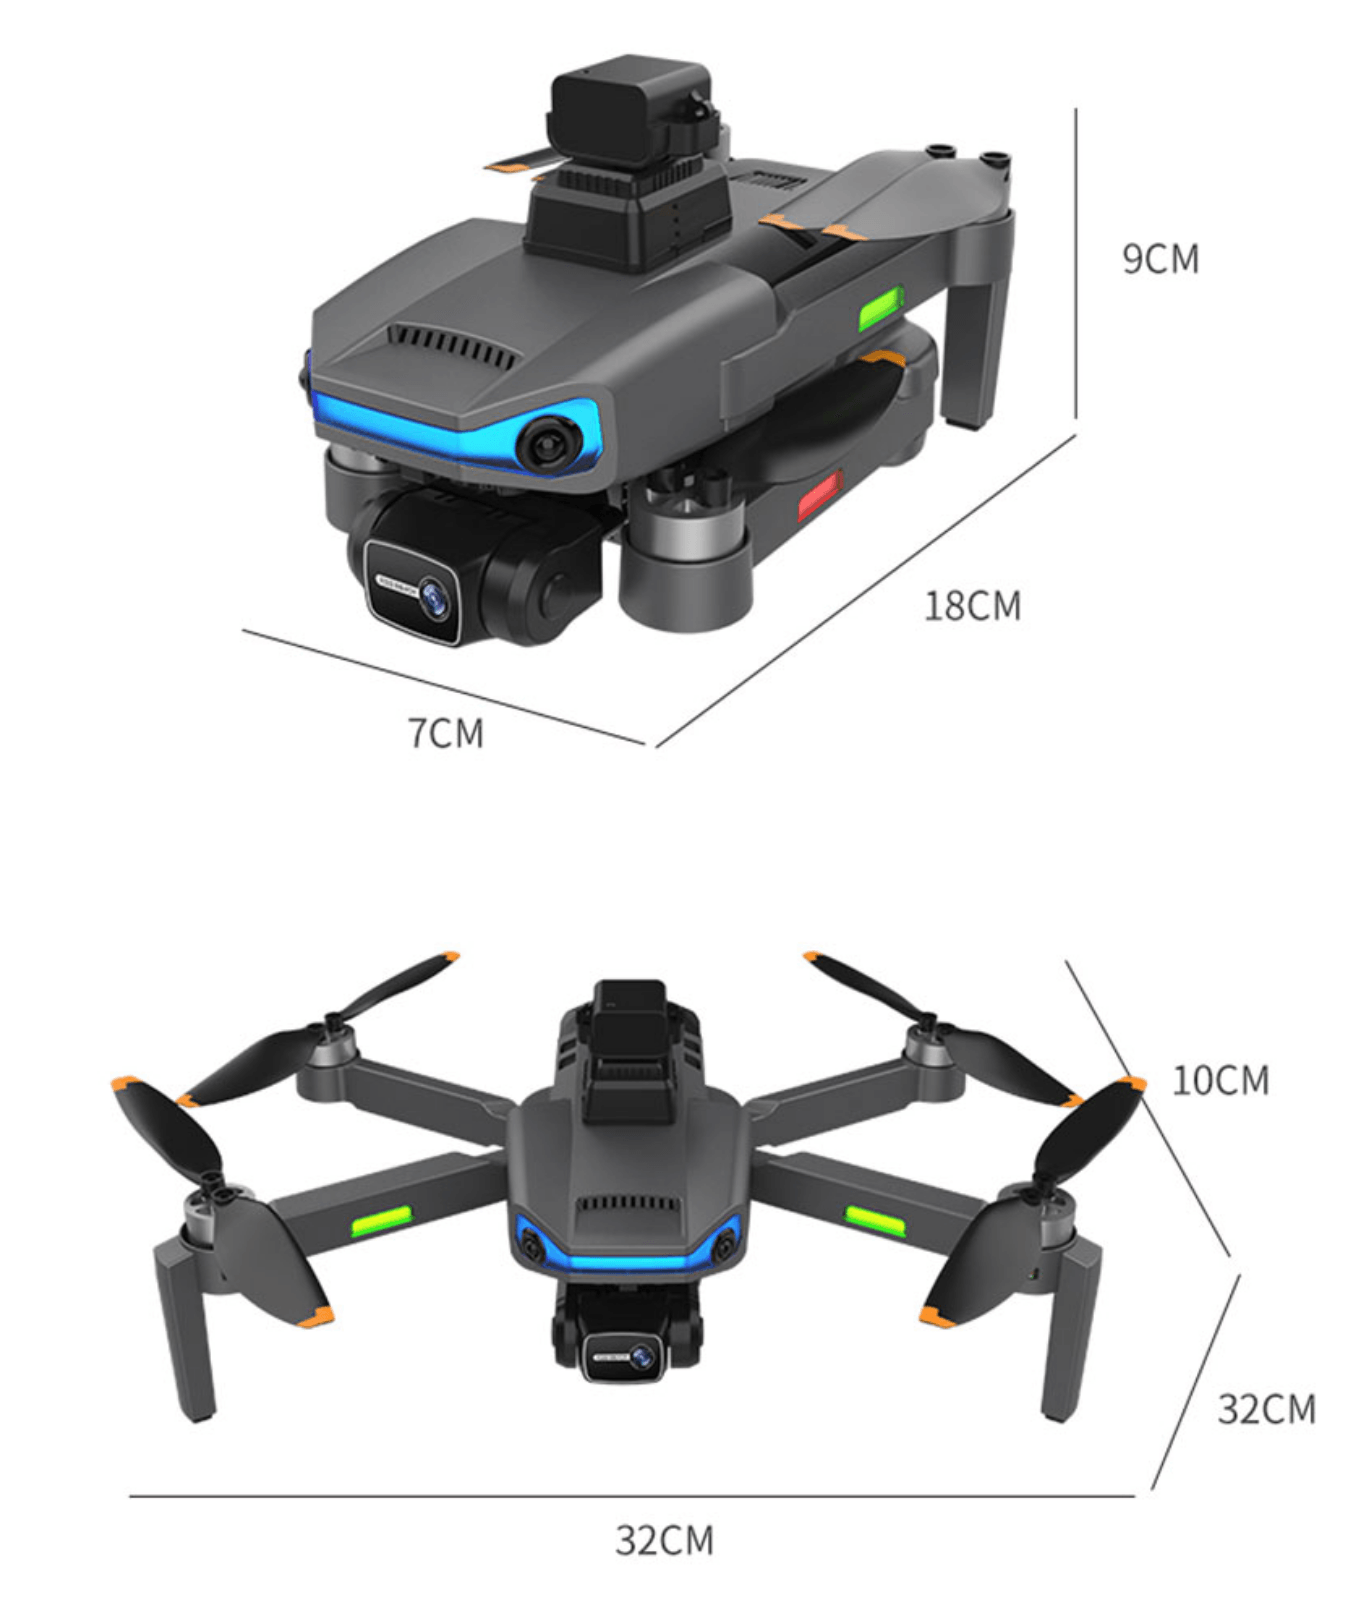 PROFESSIONAL DRONE CAMERA 8K 5G 3 AXIS ANTI SHAKE GIMBAL 360° OBSTACLE AVOIDANCE TECHNOLOGY - APS Drone Tech